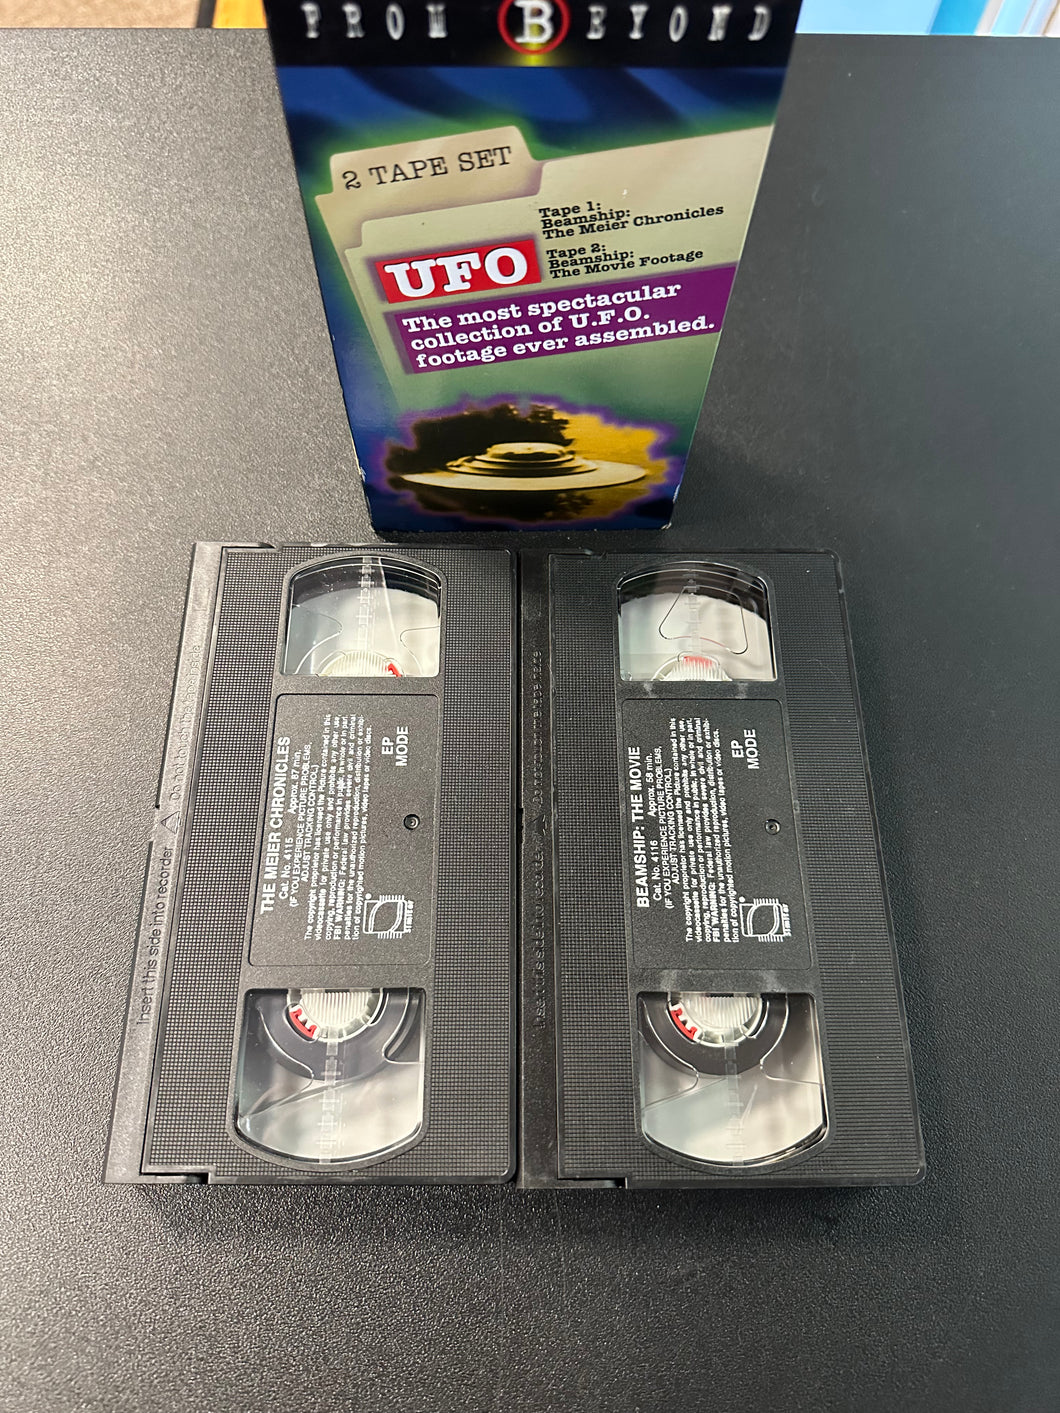 From Beyond UFO Beamship: The Meier Chronicles/The Movie Footage 2 Tapes [VHS] PREOWNED